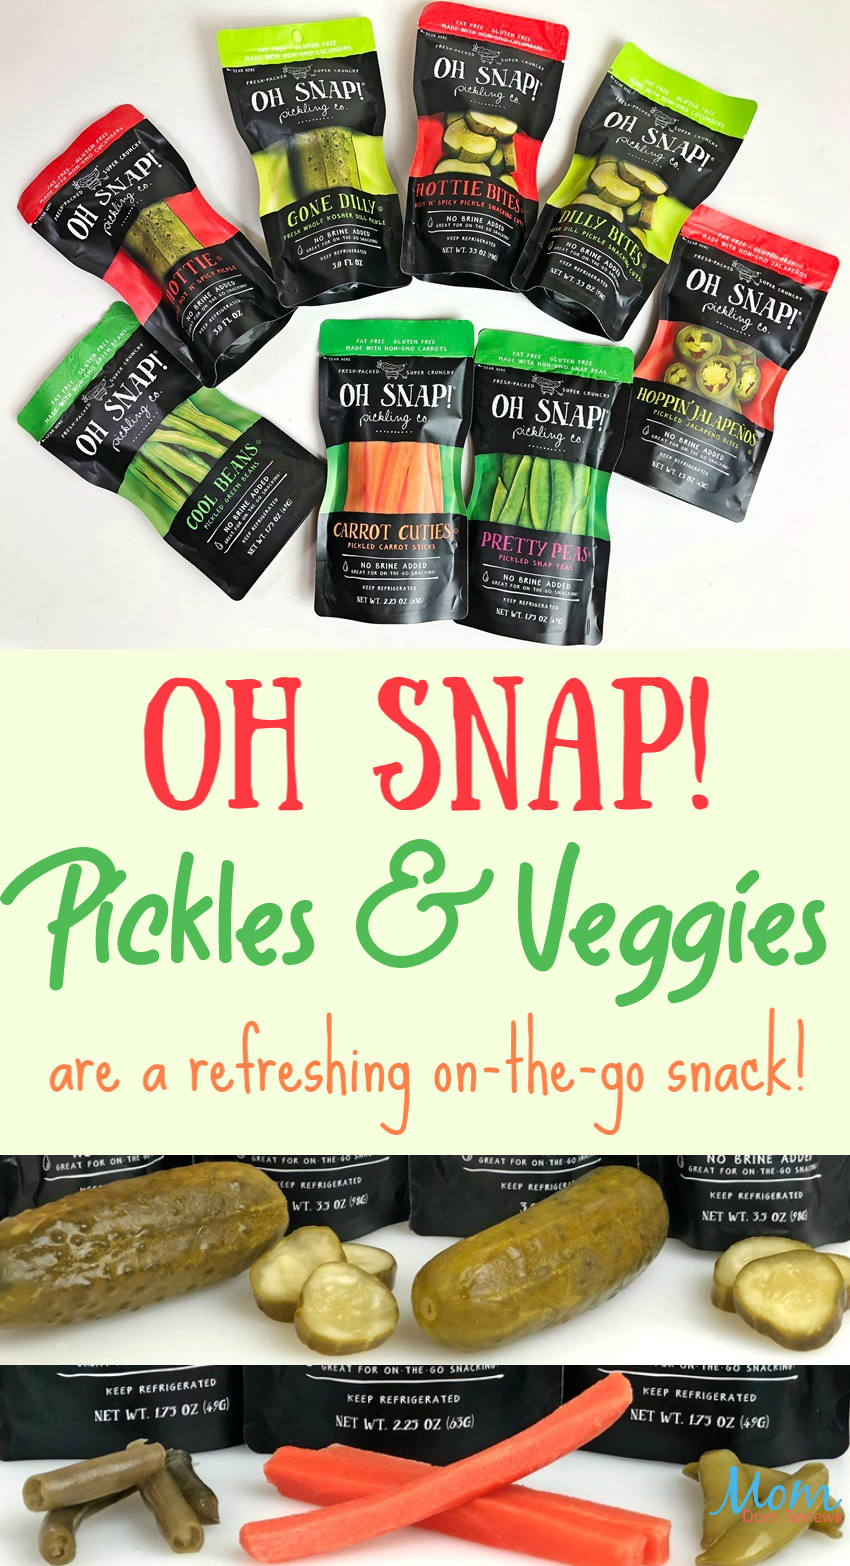 OH SNAP! Pickles and Veggies are a Refreshing On-the-Go Snack! #SpringFunonMDR